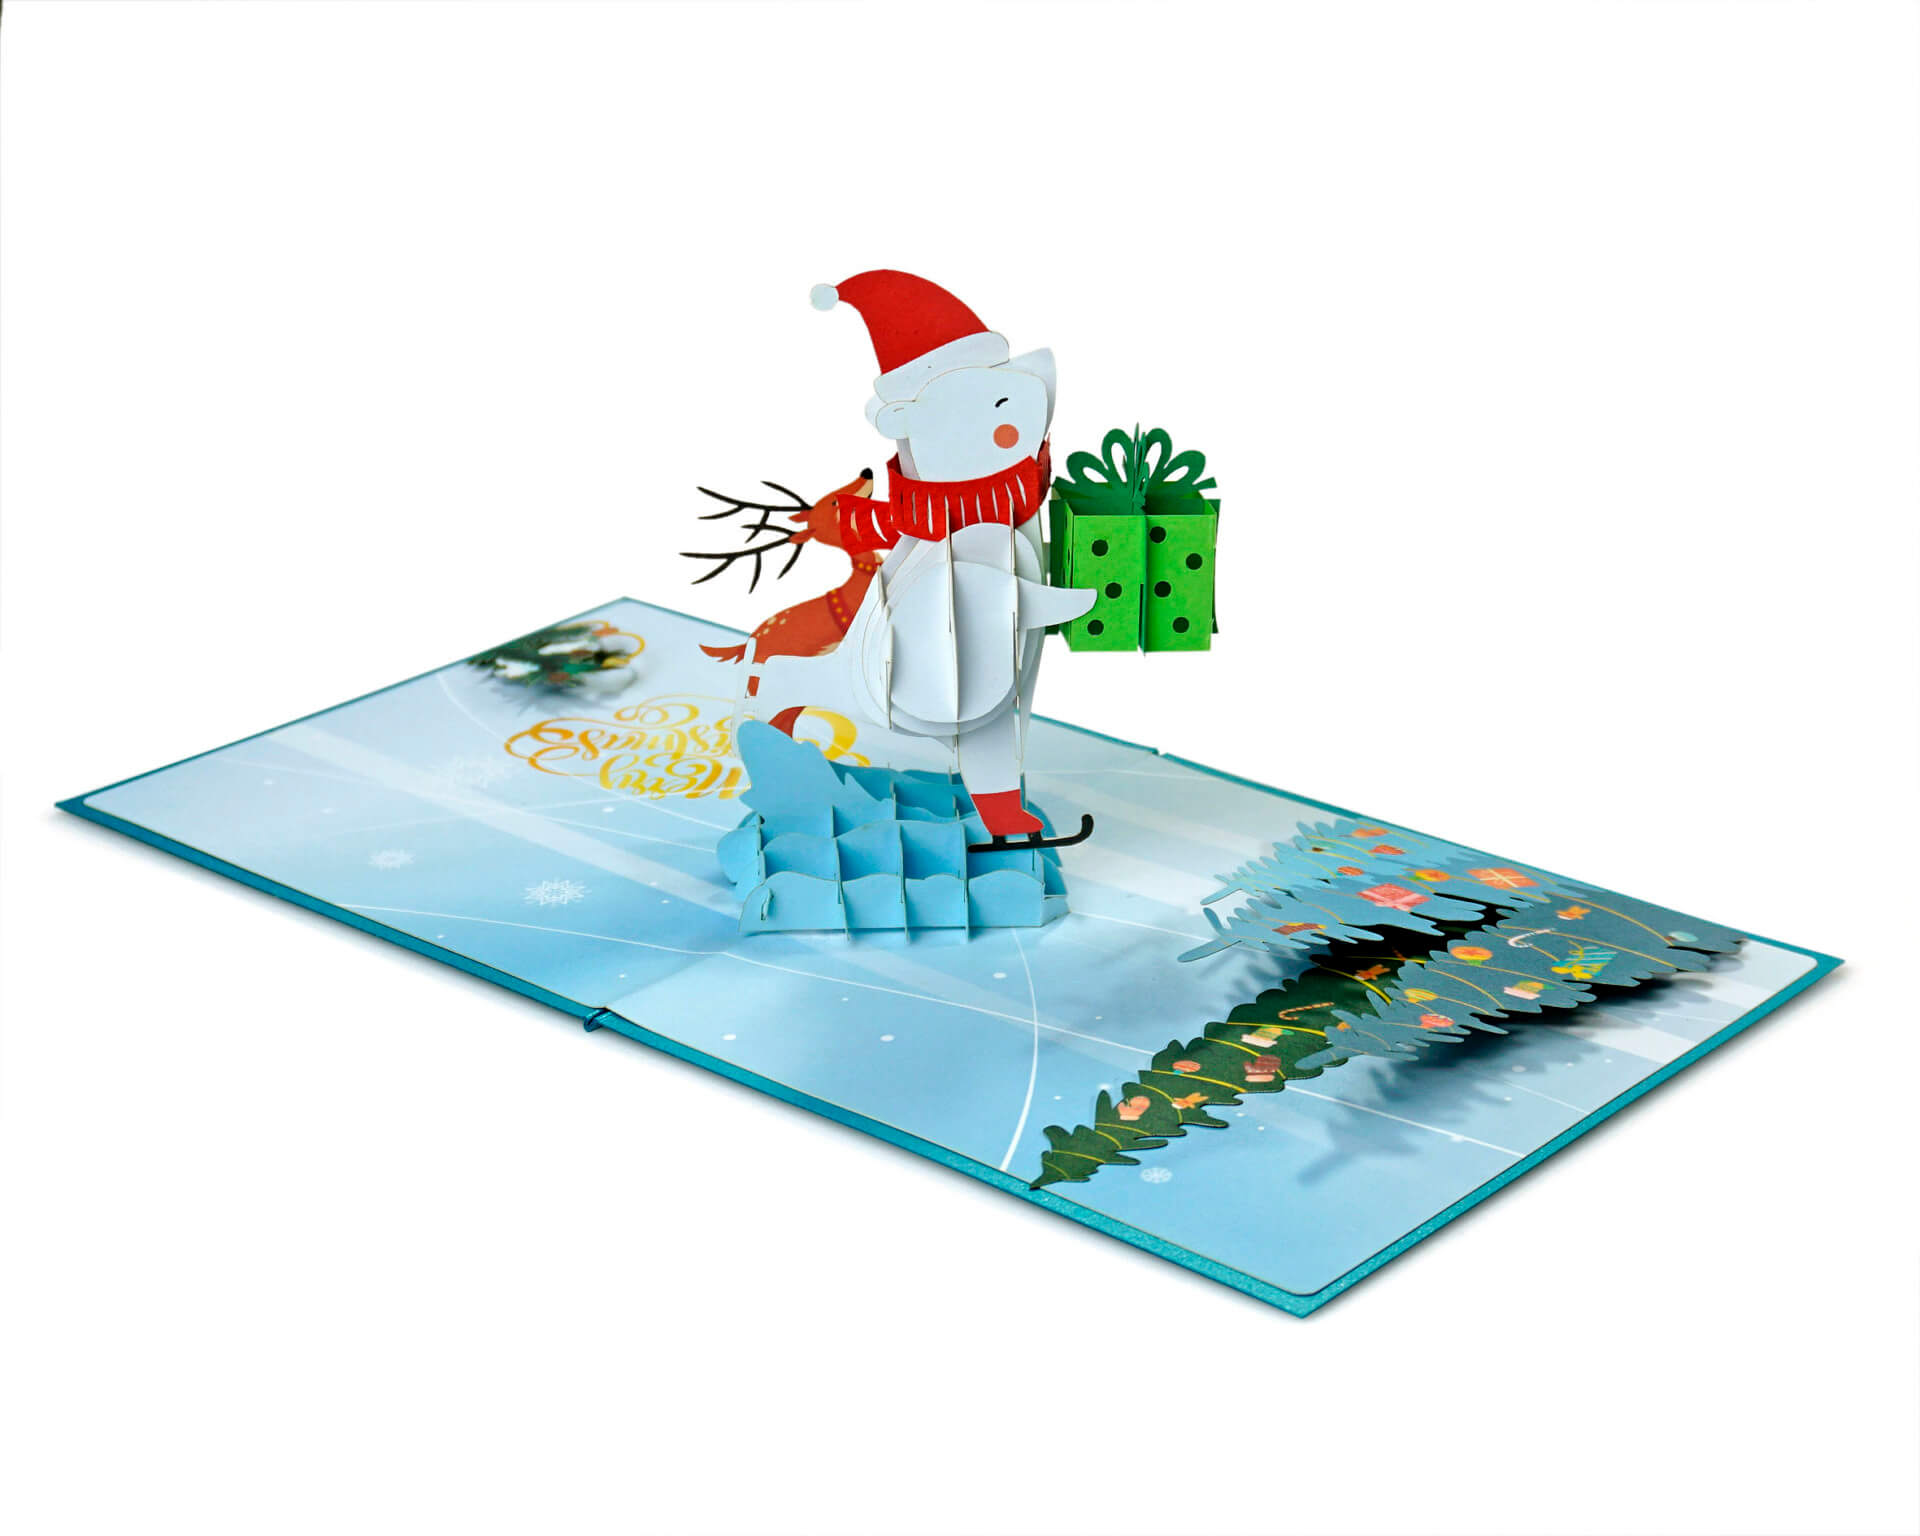 3D pop-up greeting card for Christmas